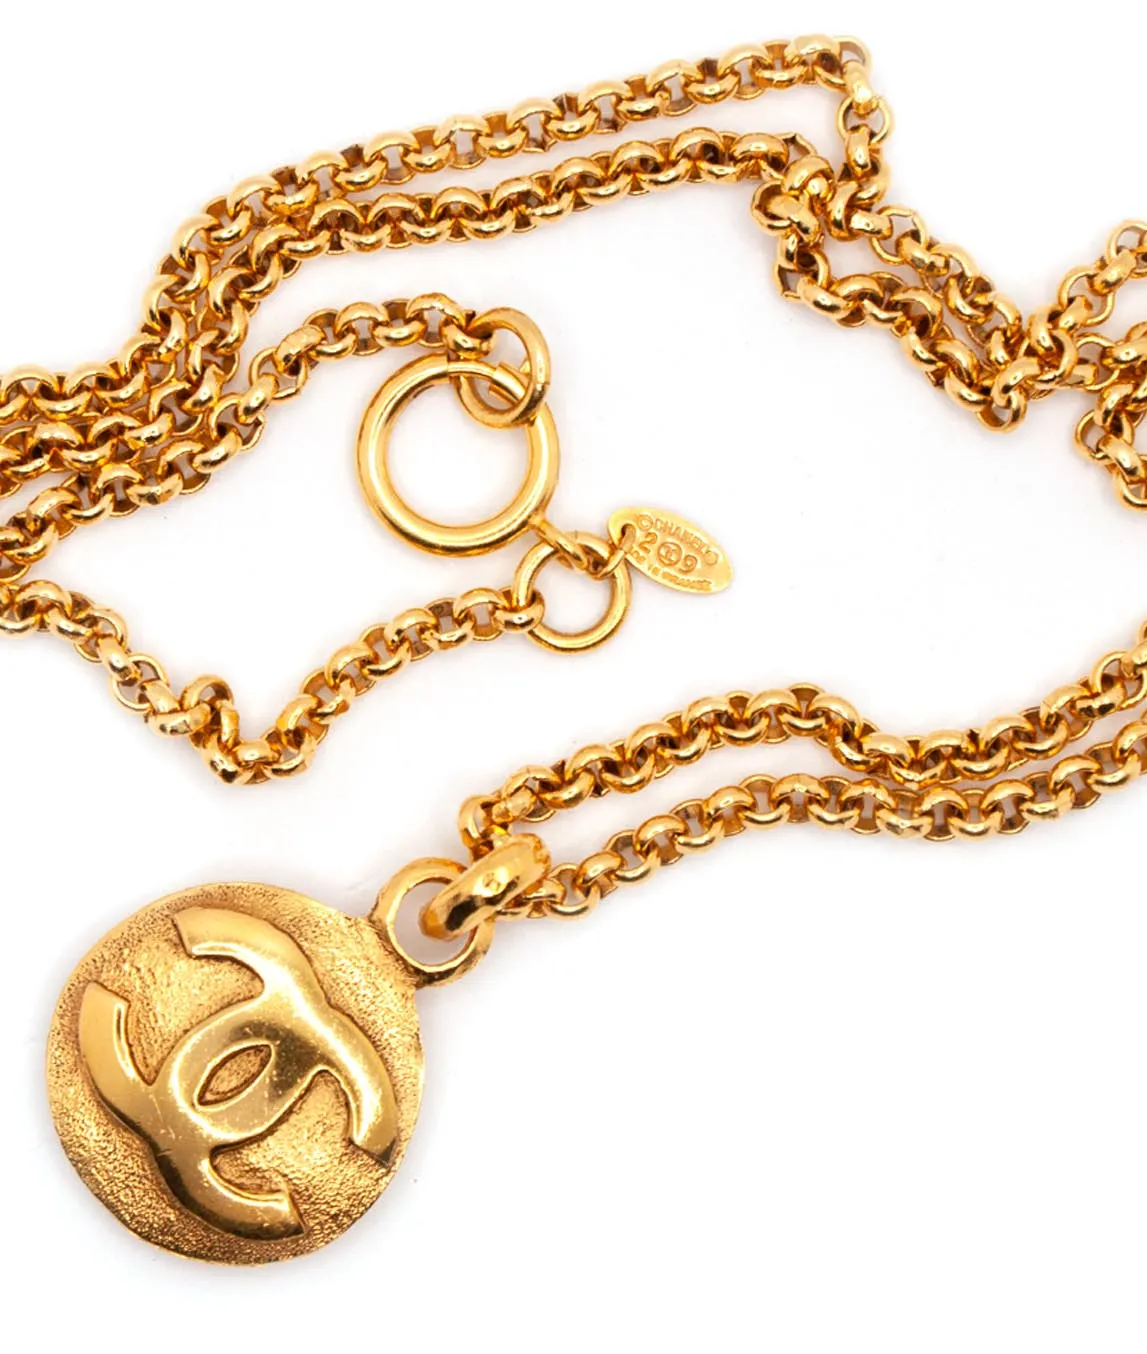 Round CC Chanel logo pendant on gold-plated chain from 1990 with oversized clasp